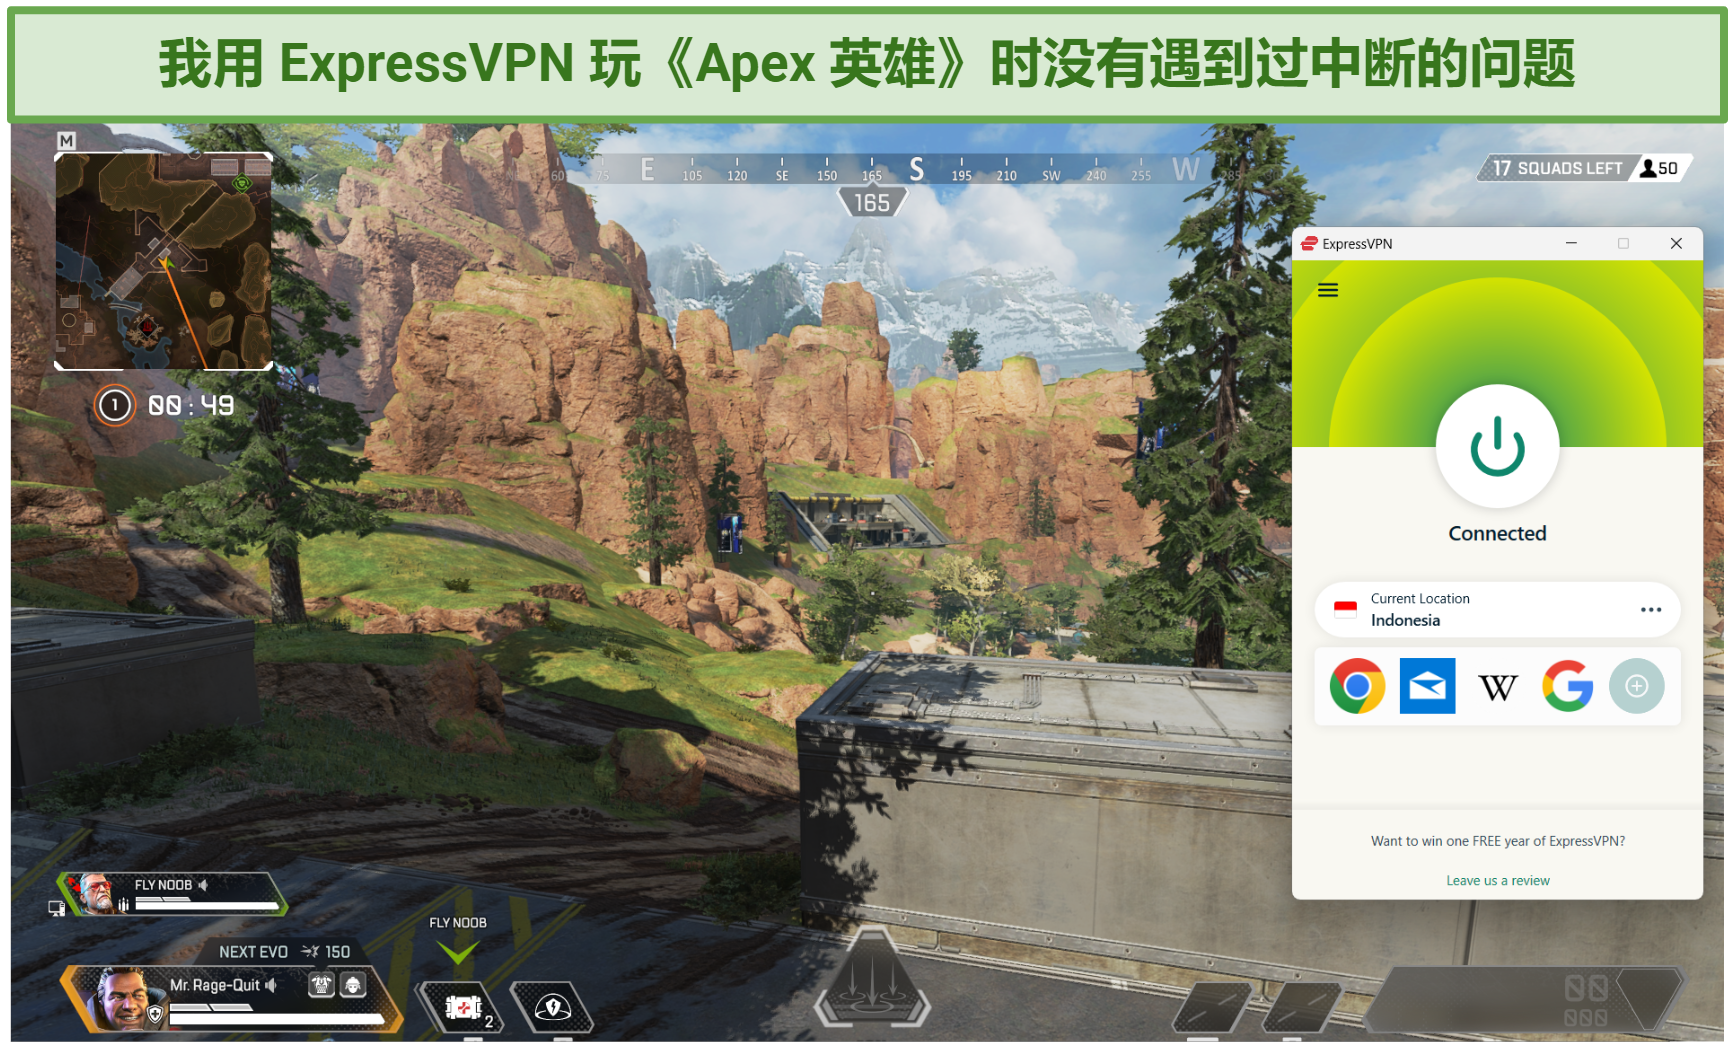 A screenshot showing an Apex Legends gameplay while connected to ExpressVPN's Indonesia server